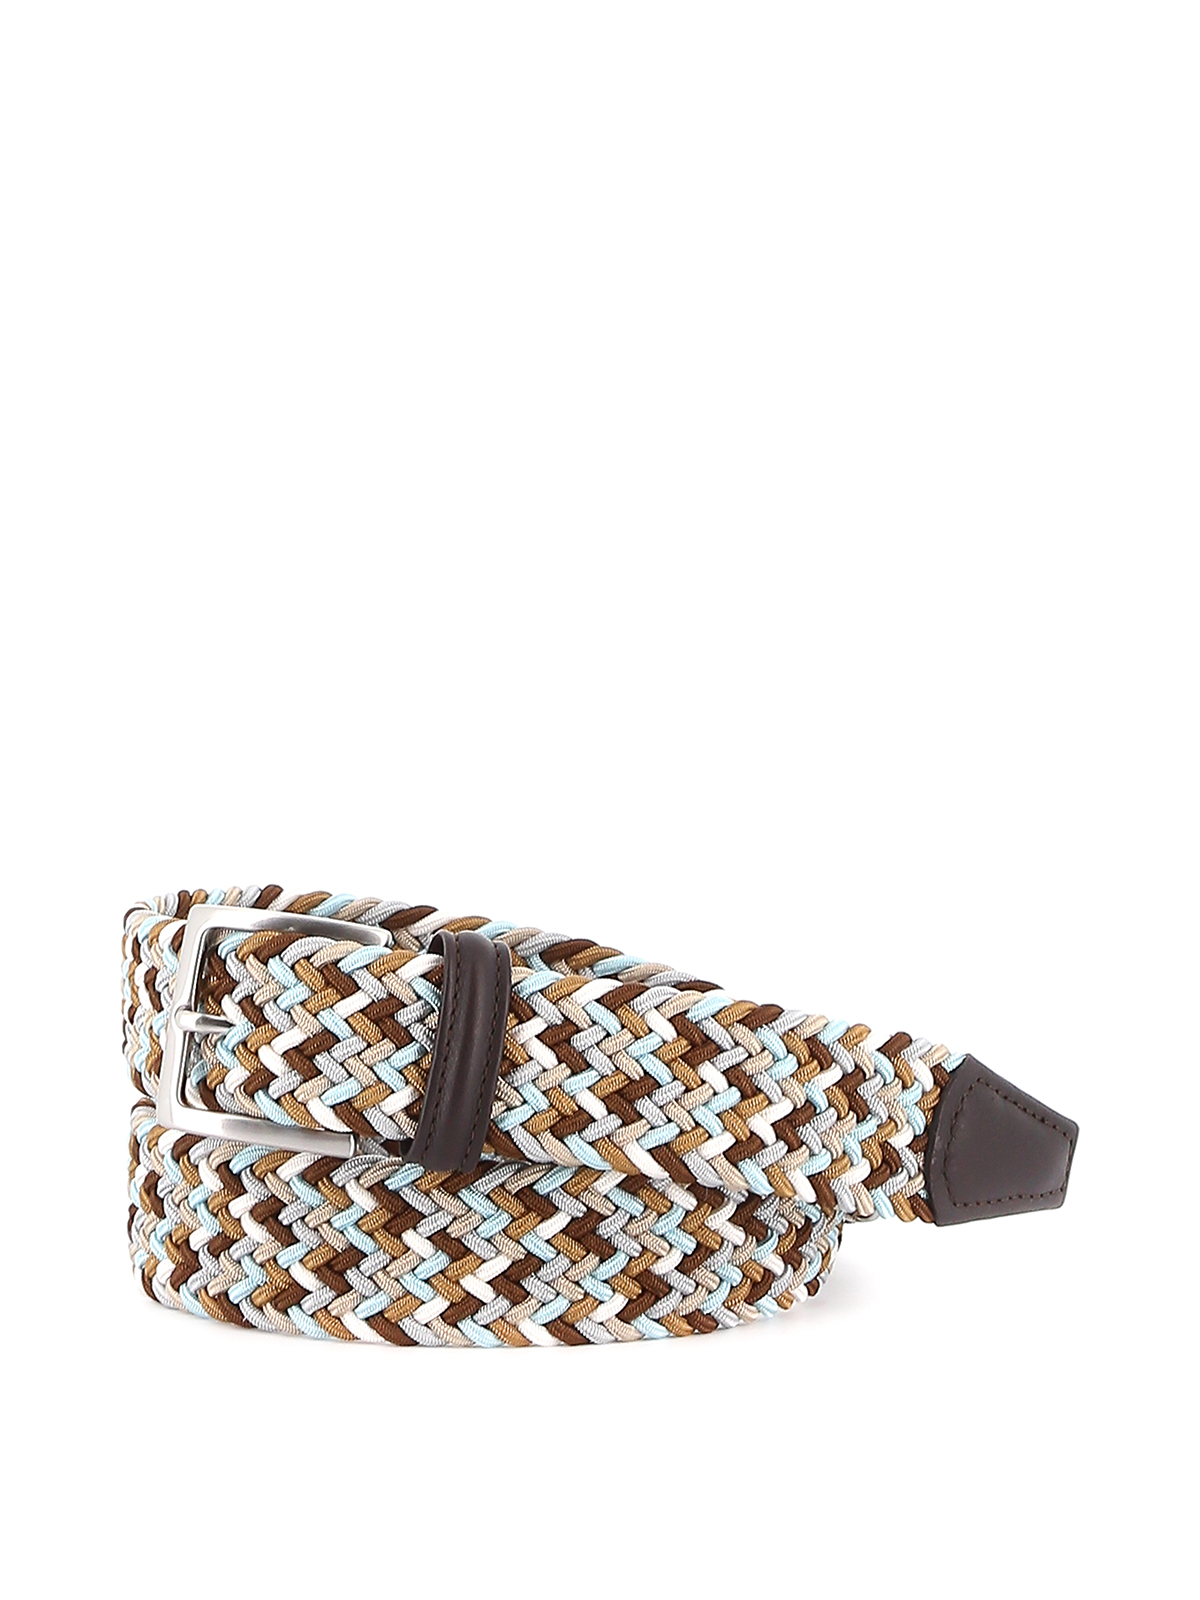 ANDERSON'S BROWN AND SKY BLUE STRETCH WOVEN FABRIC BELT